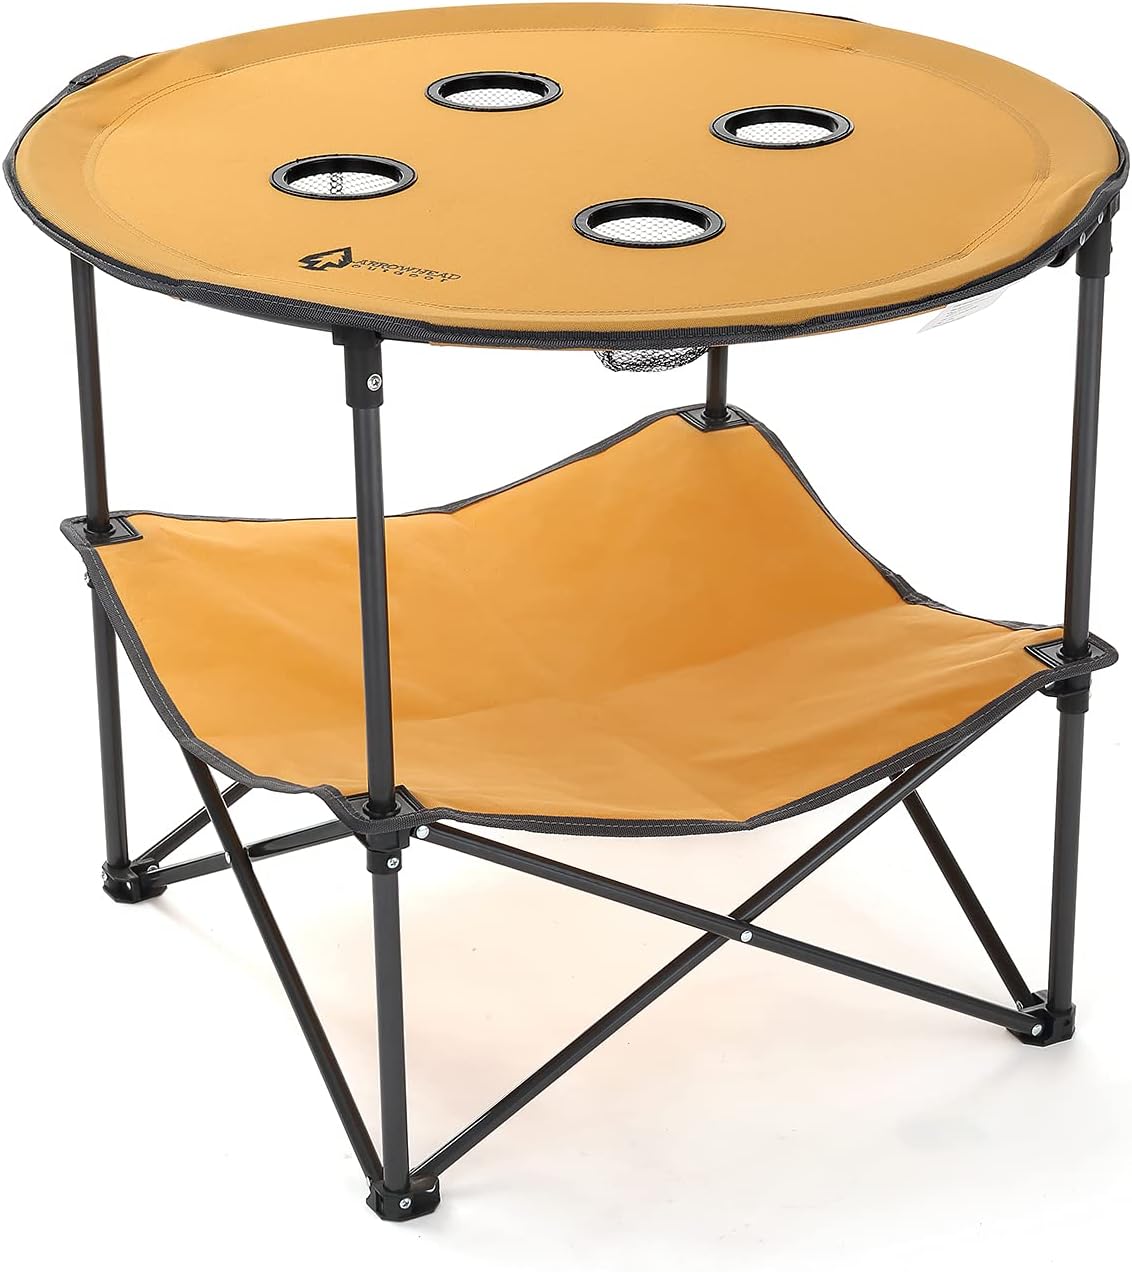 Arrowhead Outdoor Folding Tables: 28" Circular (Tan) $15, 33.5” Tailgate (Blue) $16, 26" Camp (Various) $17 & More + Free Shipping w/ Prime